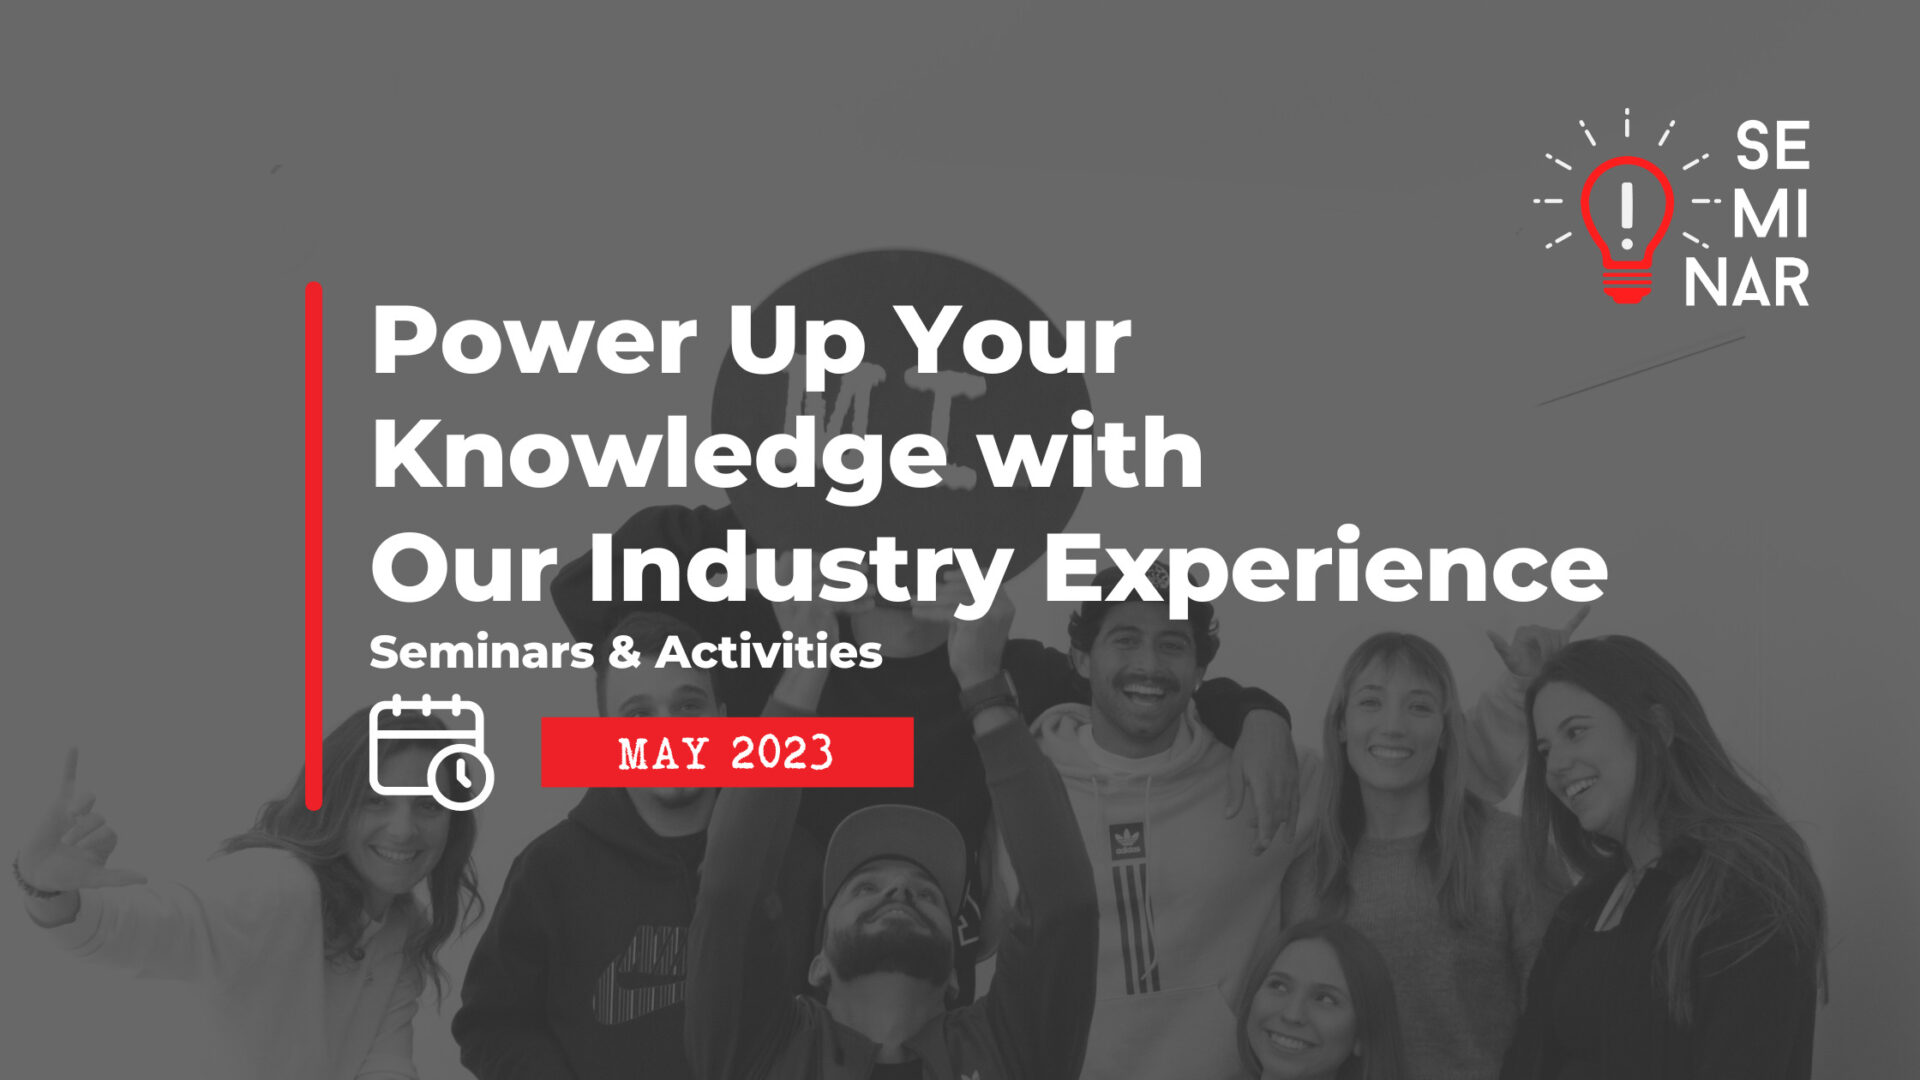 Power up your knowledge this May with our Industry Experience | Seminars & Activities